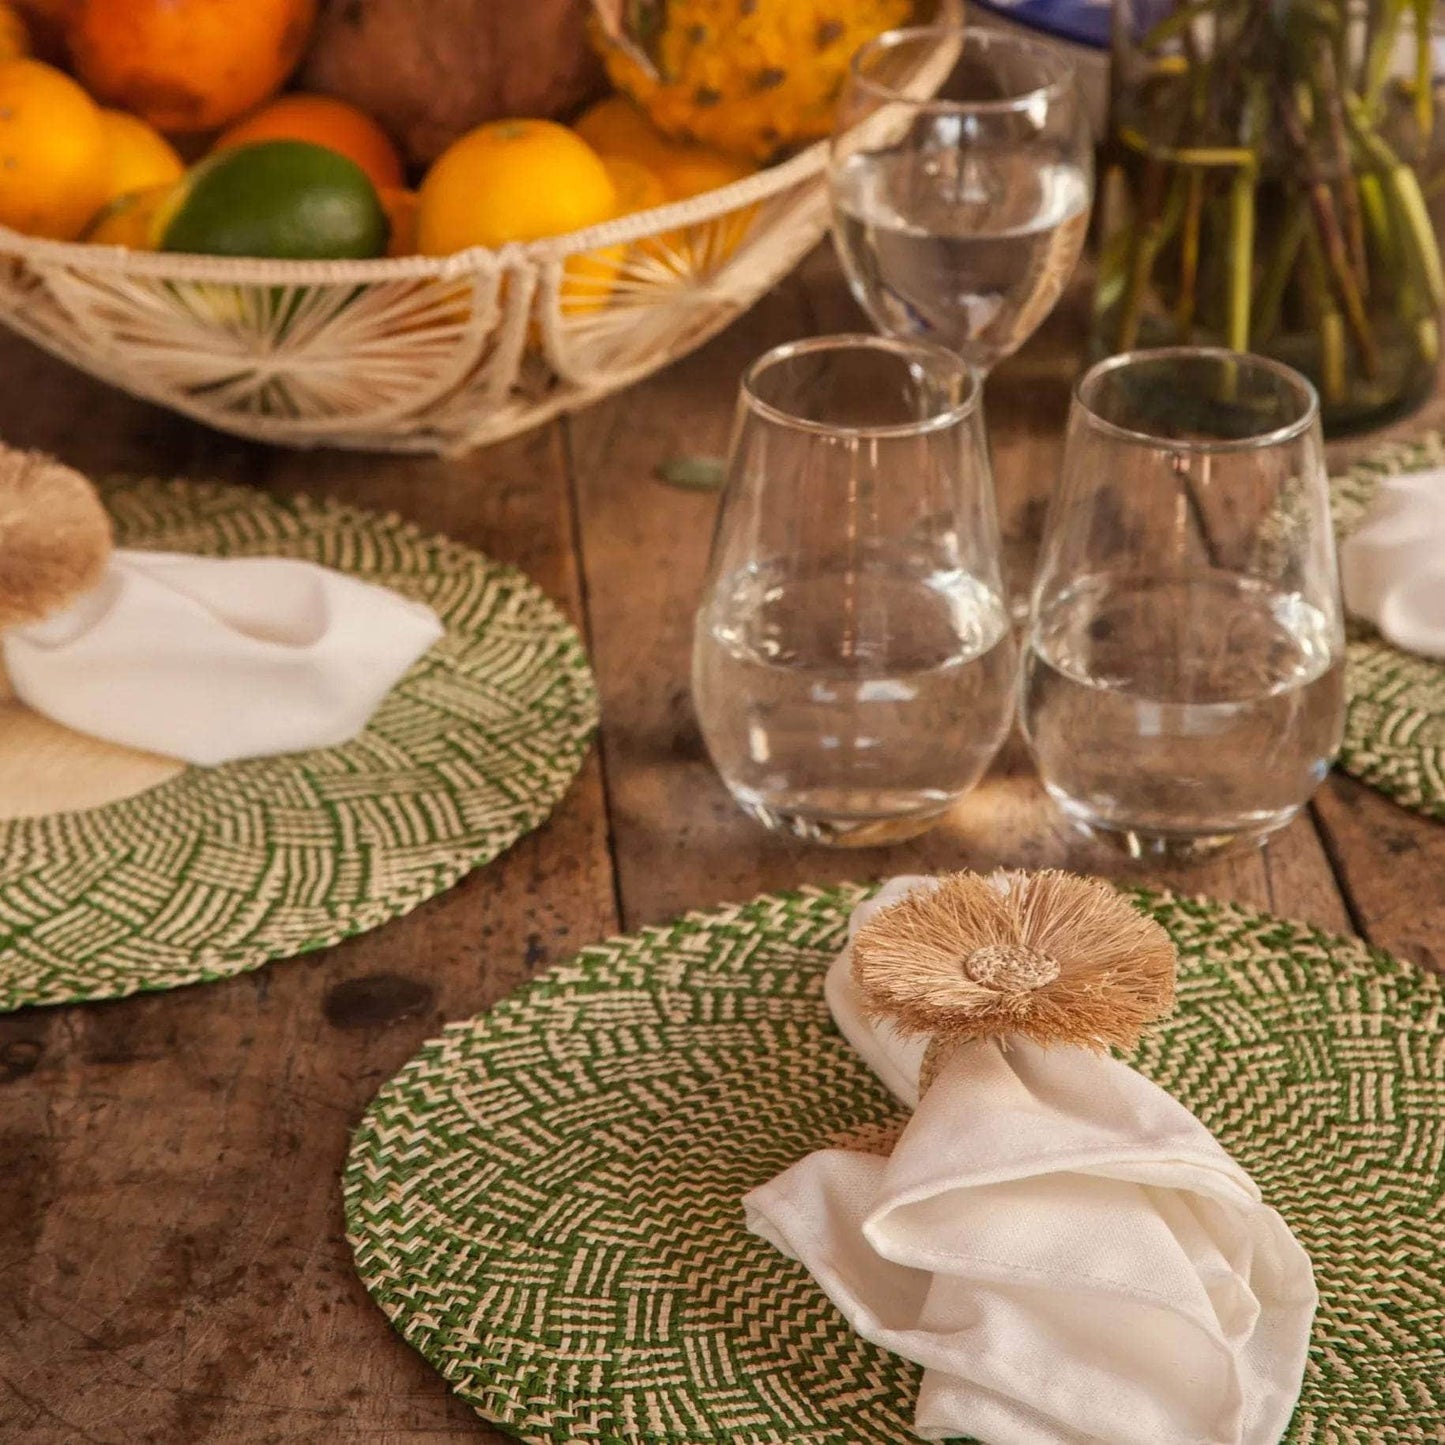 Nariño Woven Placemats (Set of 2)